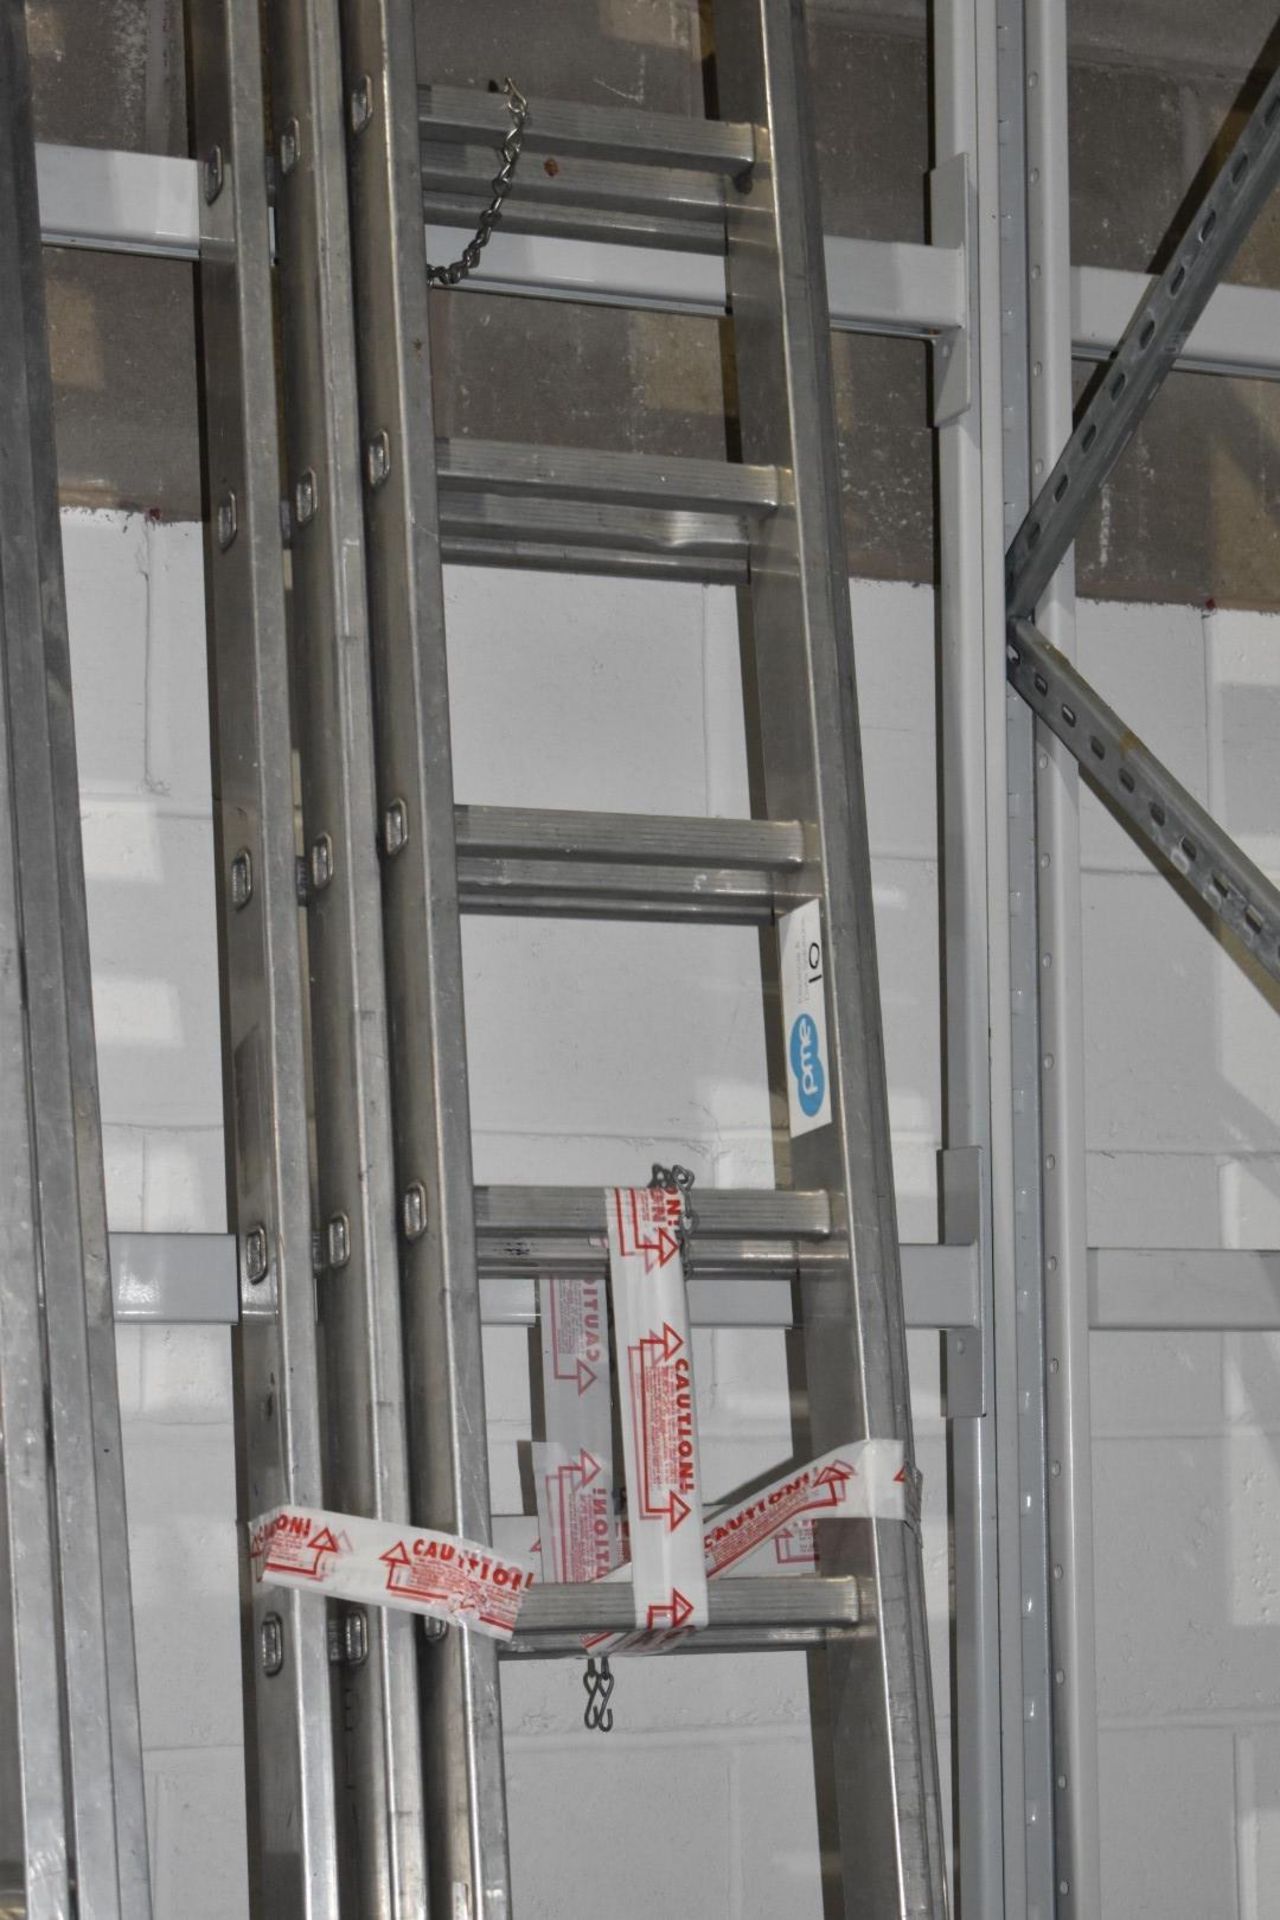 1 x Youngman DIY 3 Section Aluminium Ladders Each Section Measures 350cm SRB132 - Image 3 of 6